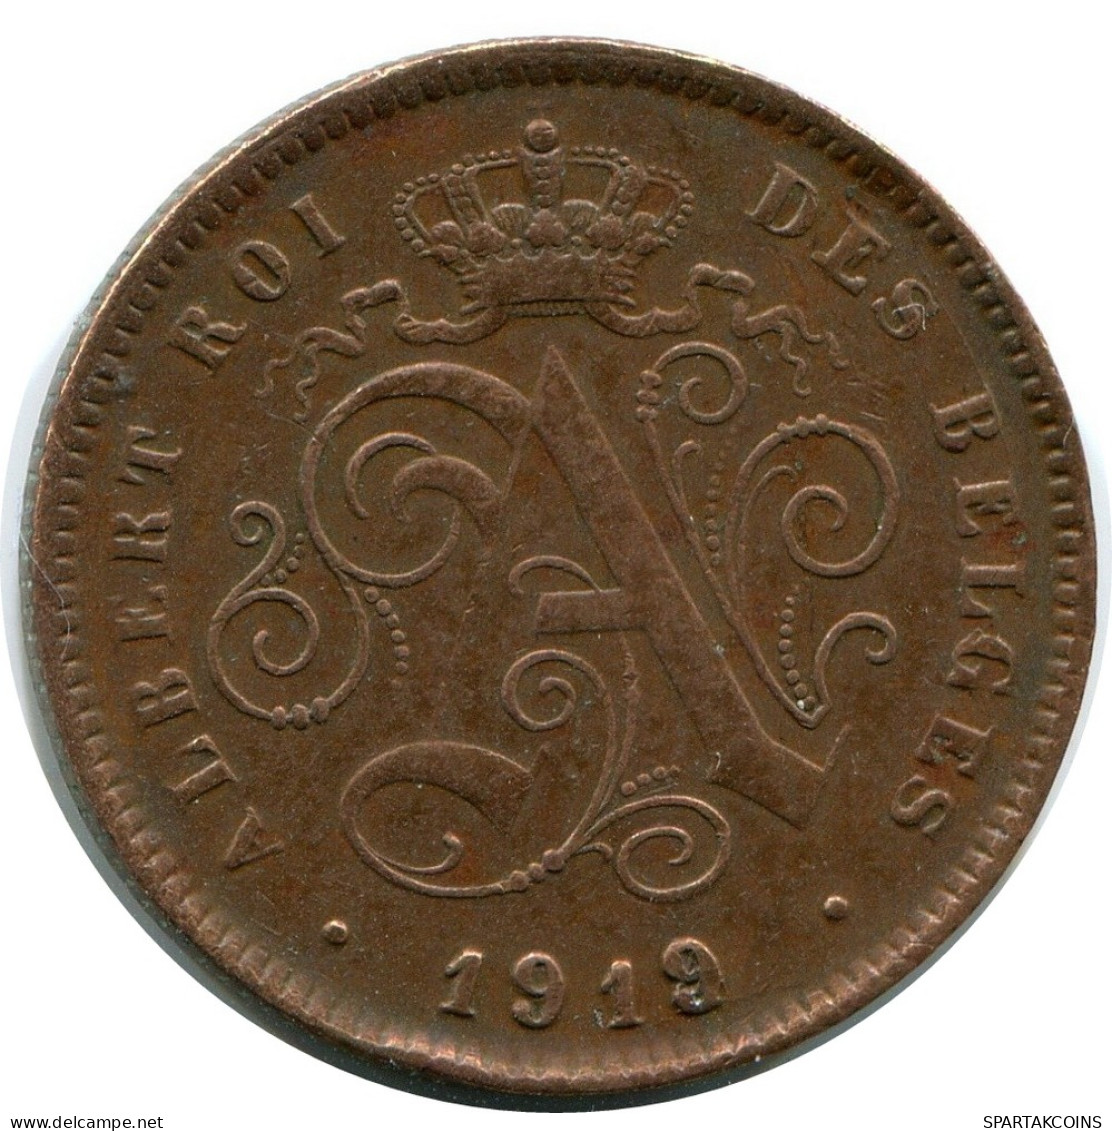 2 CENTIMES 1919 FRENCH Text BELGIUM Coin #BA432.U - 2 Cents